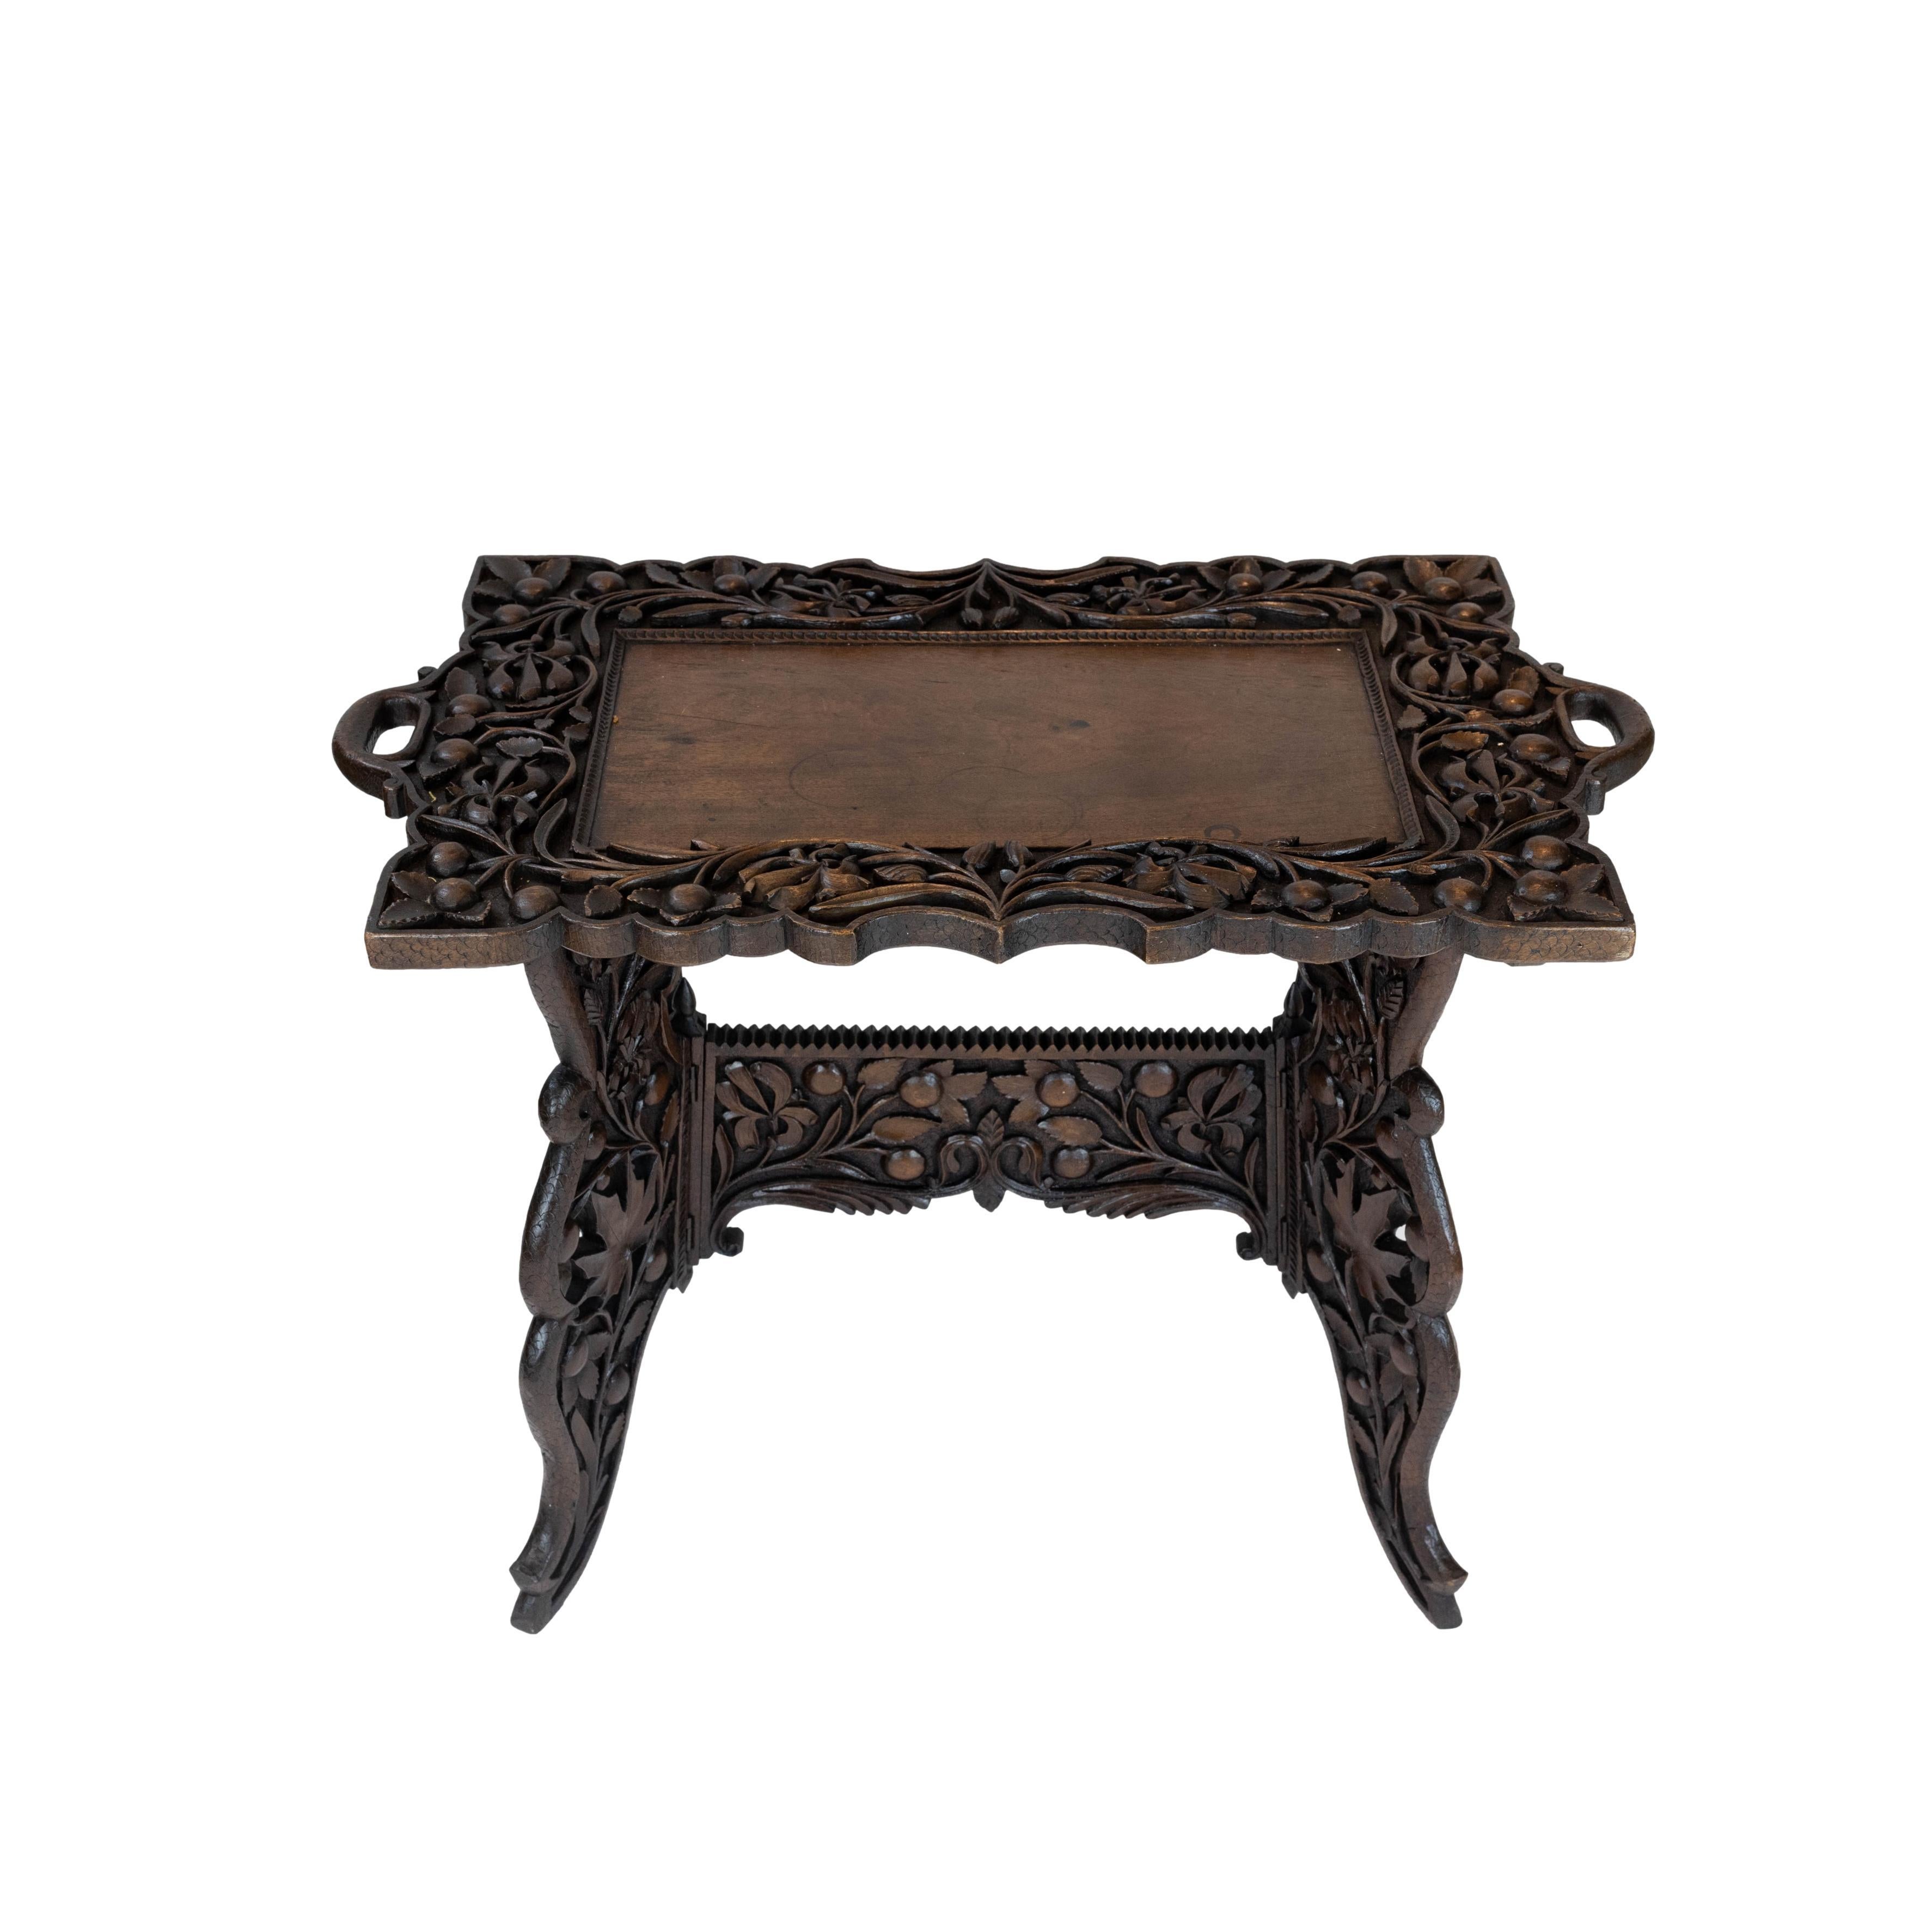 Elaborately Hand-Carved Solid Walnut Campaign Tray-Top Table, English, ca. 1890 For Sale 6